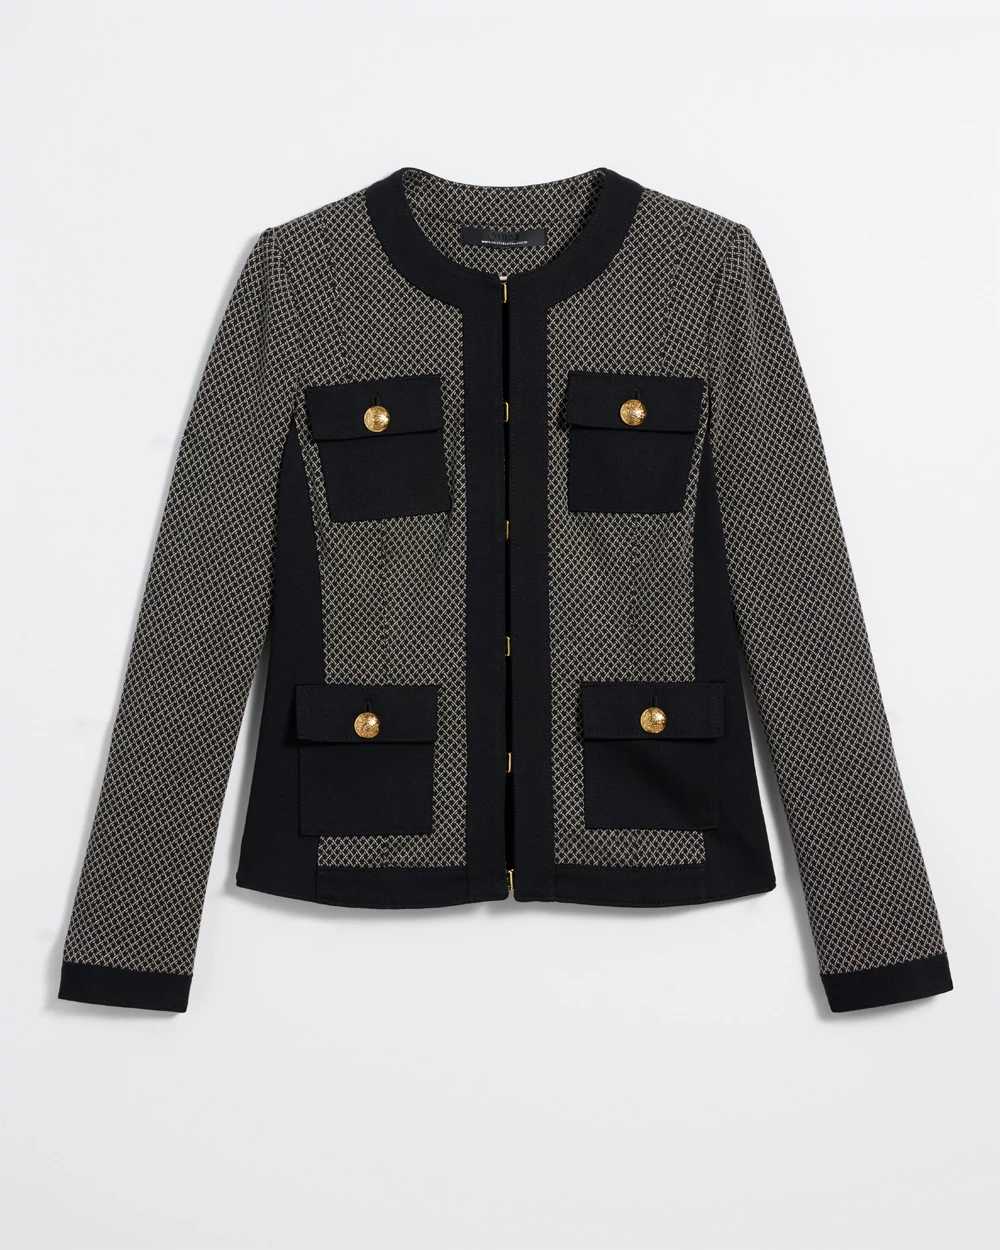 Petite WHBM® Jacquard Knit Stylist Jacket click to view larger image.